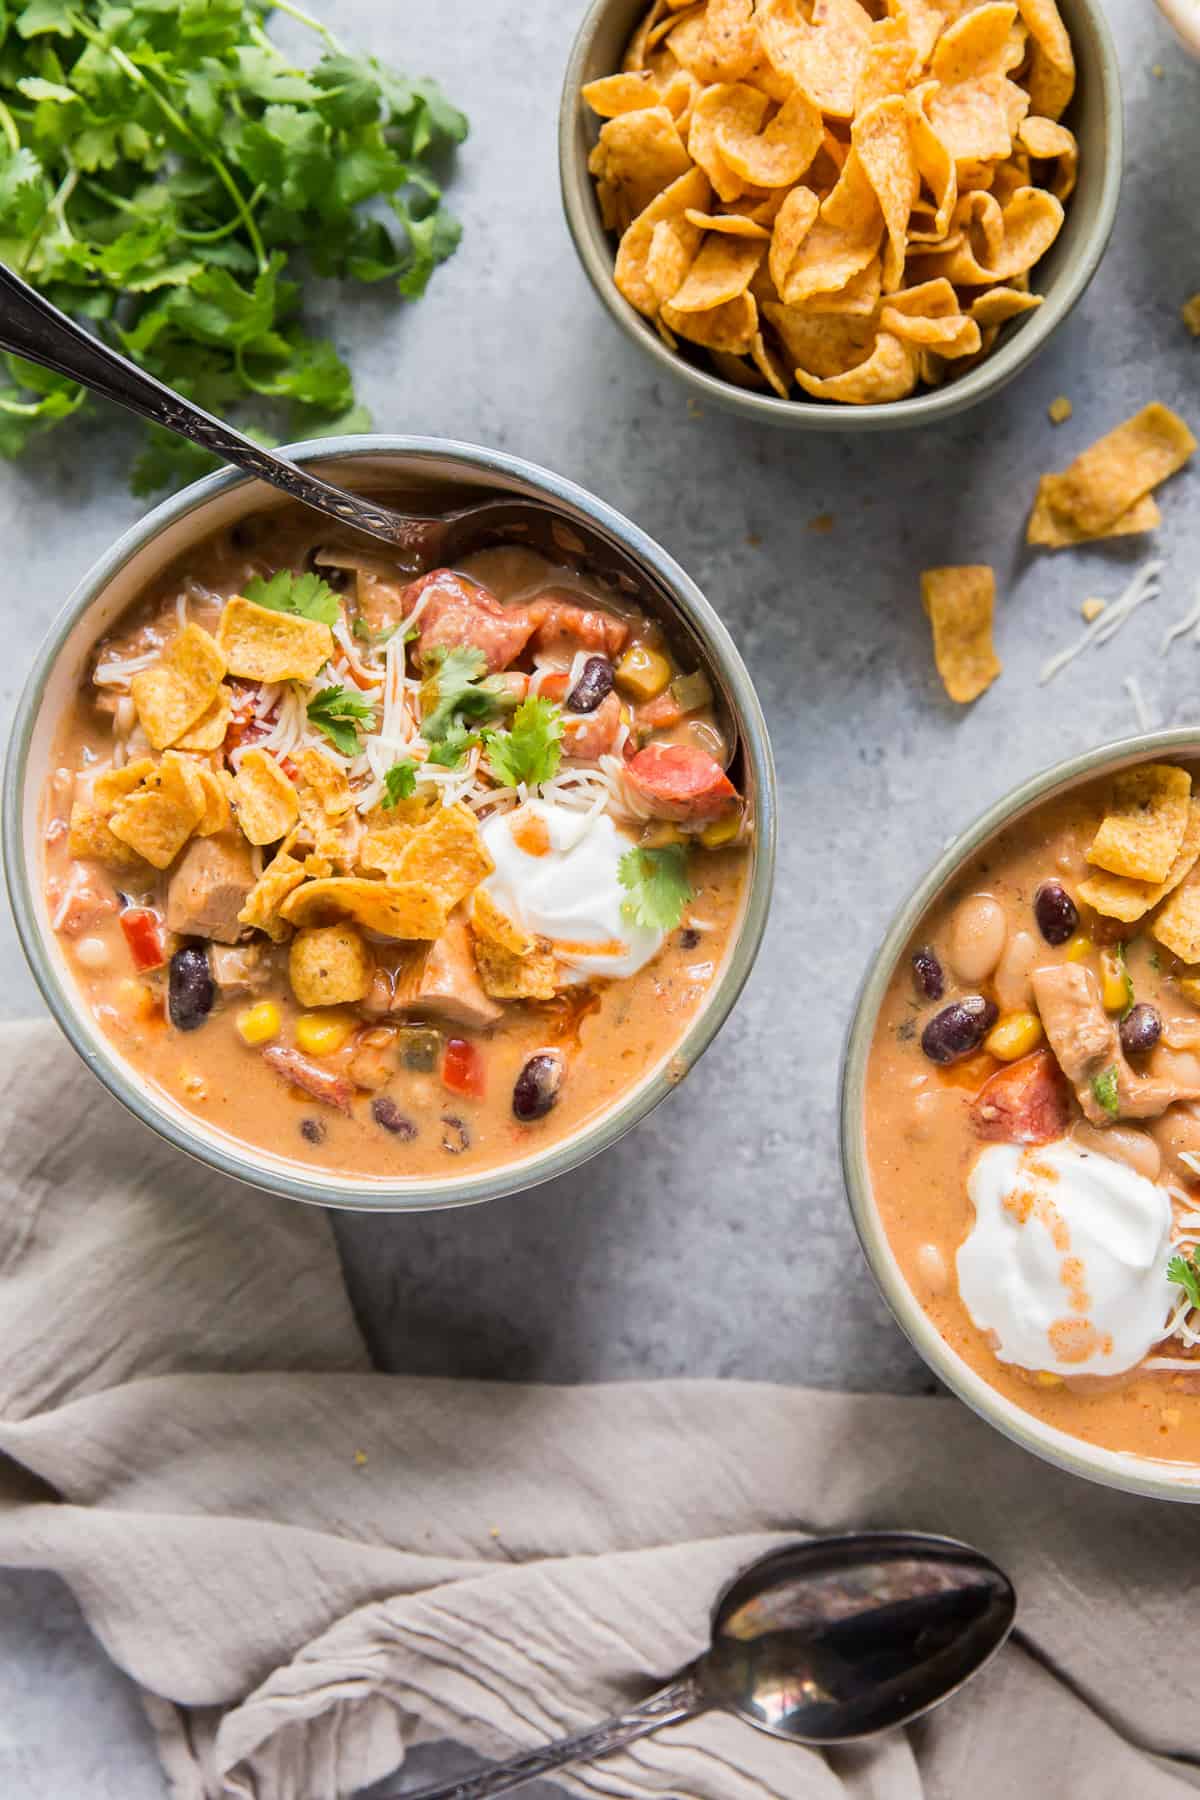 Two bowls of soup next to a bunch of cilantro and a bowl of fritos.